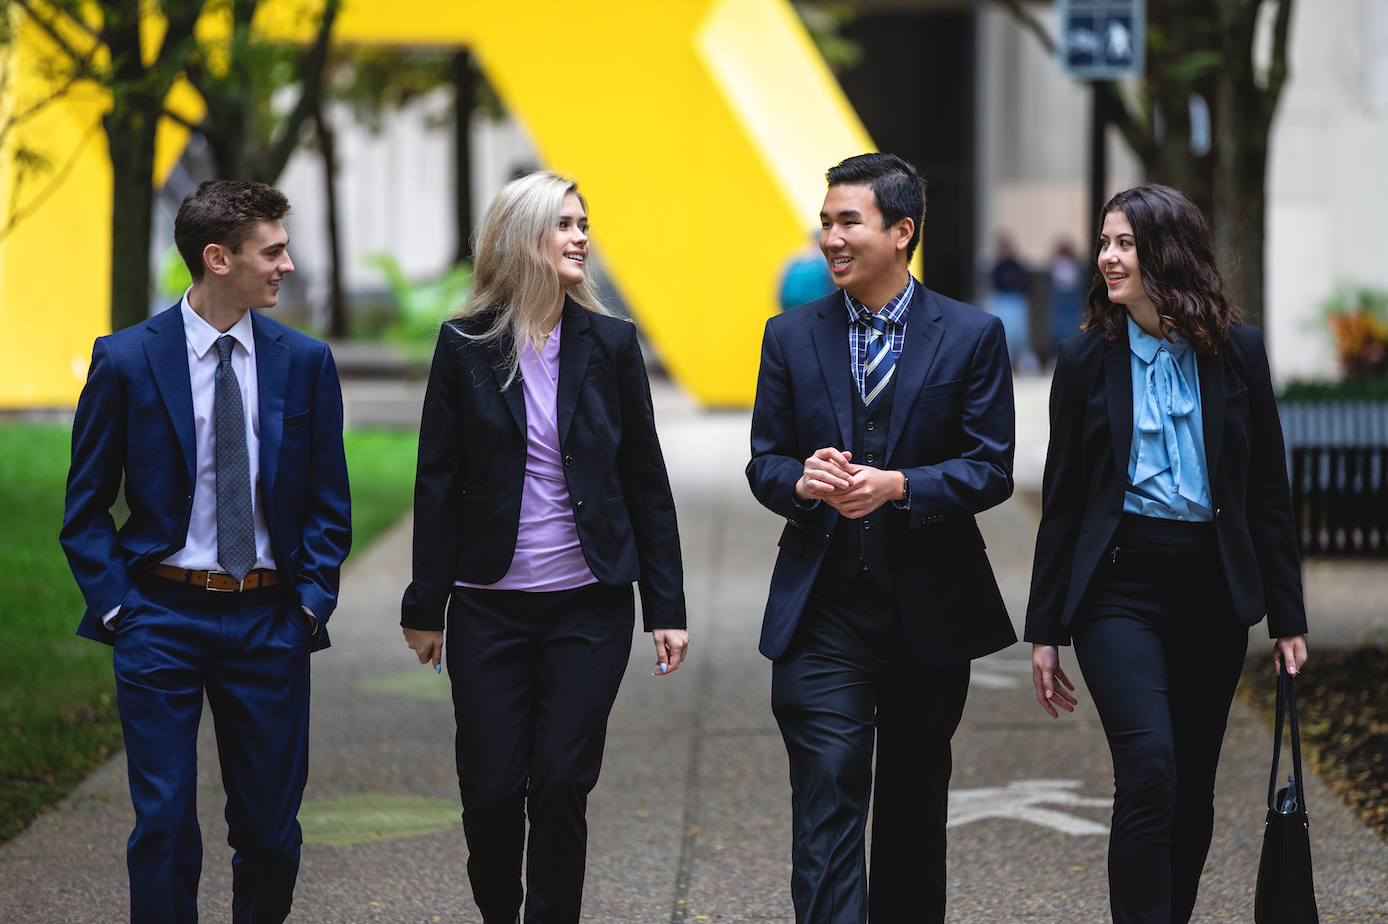 Four undergraduate students in business suits walking through campus.